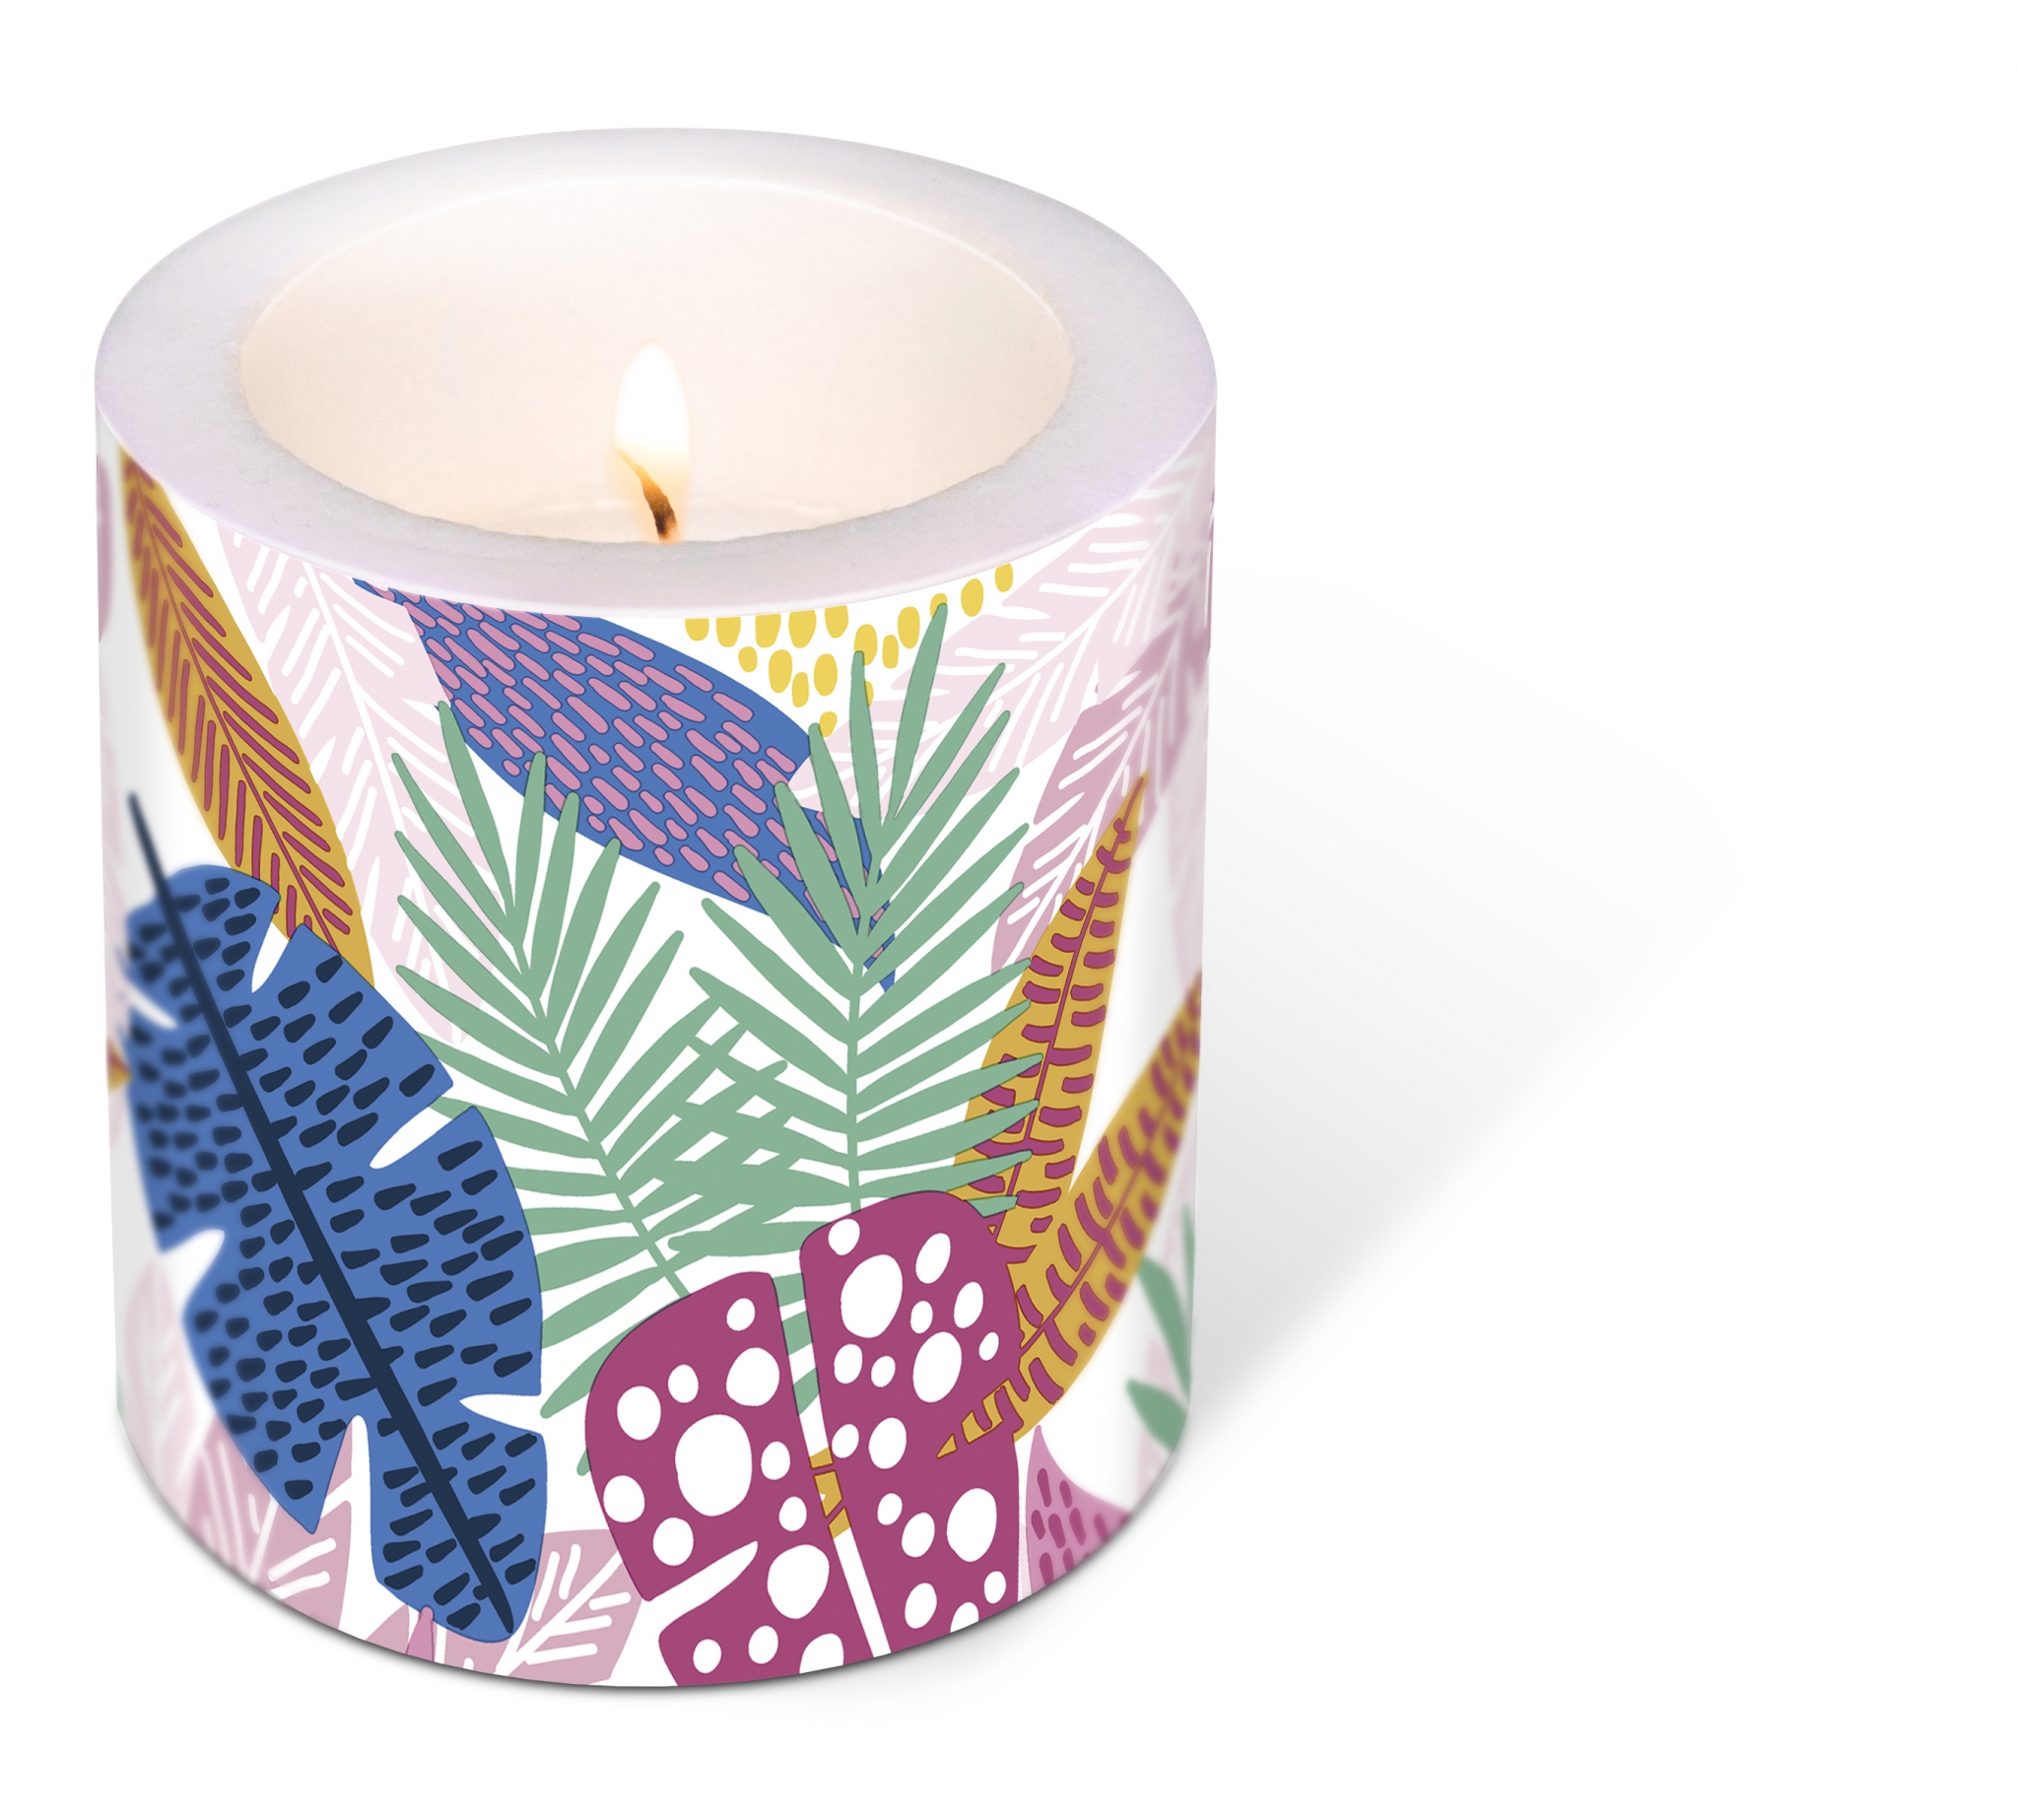 Dekorkerze - Decorated Candle Wild leaves